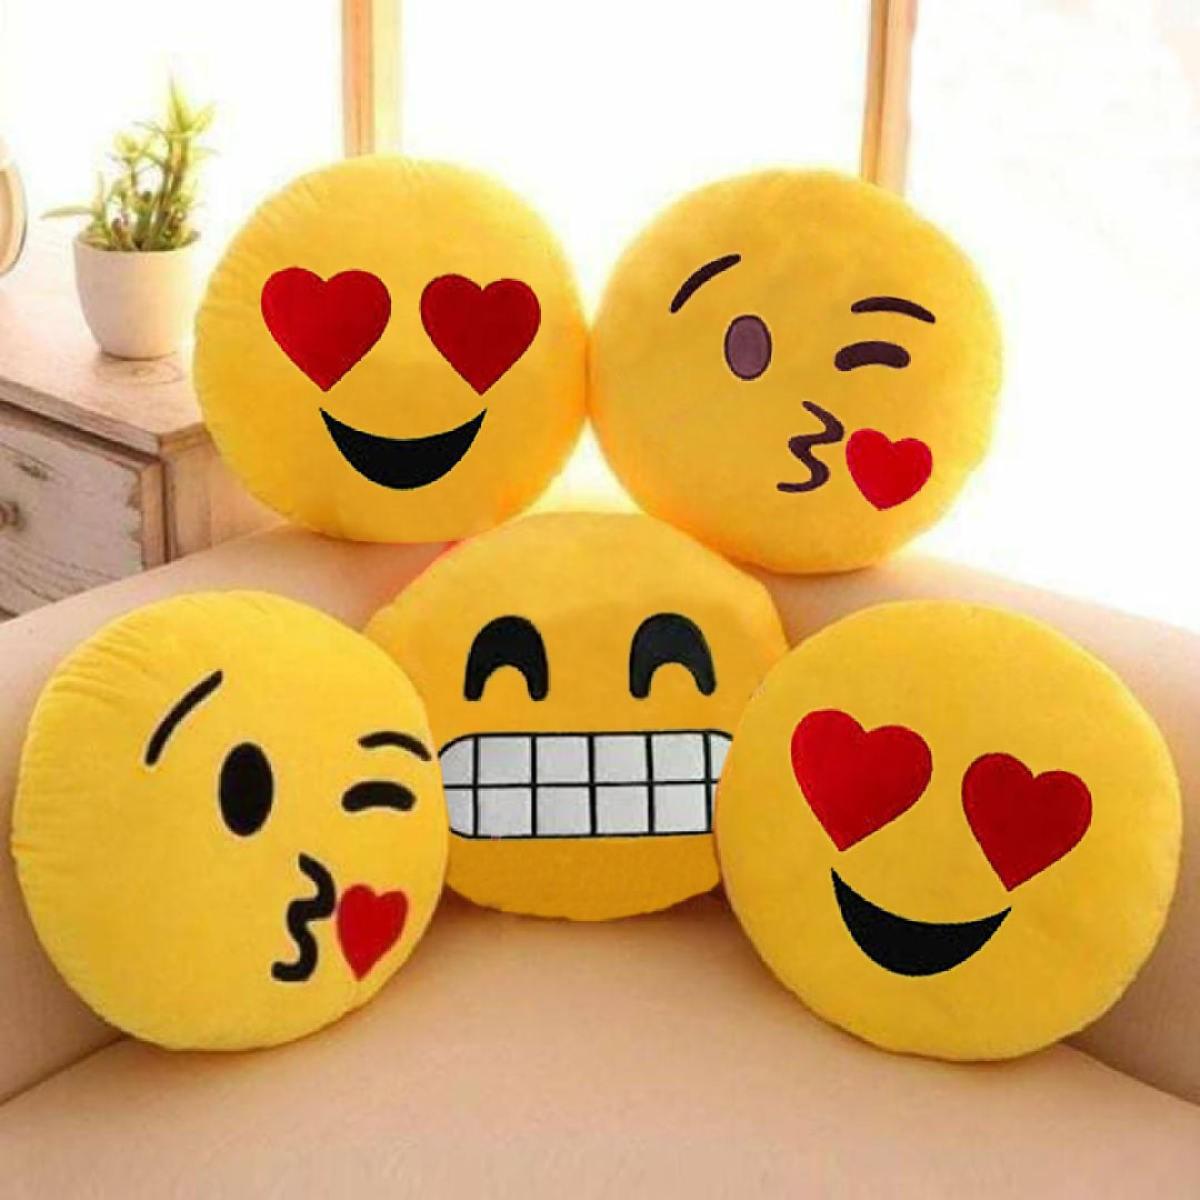 Pack of 5 Assorted Emoji Soft Pillows Stuffed Cushions Round Home Decor Pillows Relaxsit